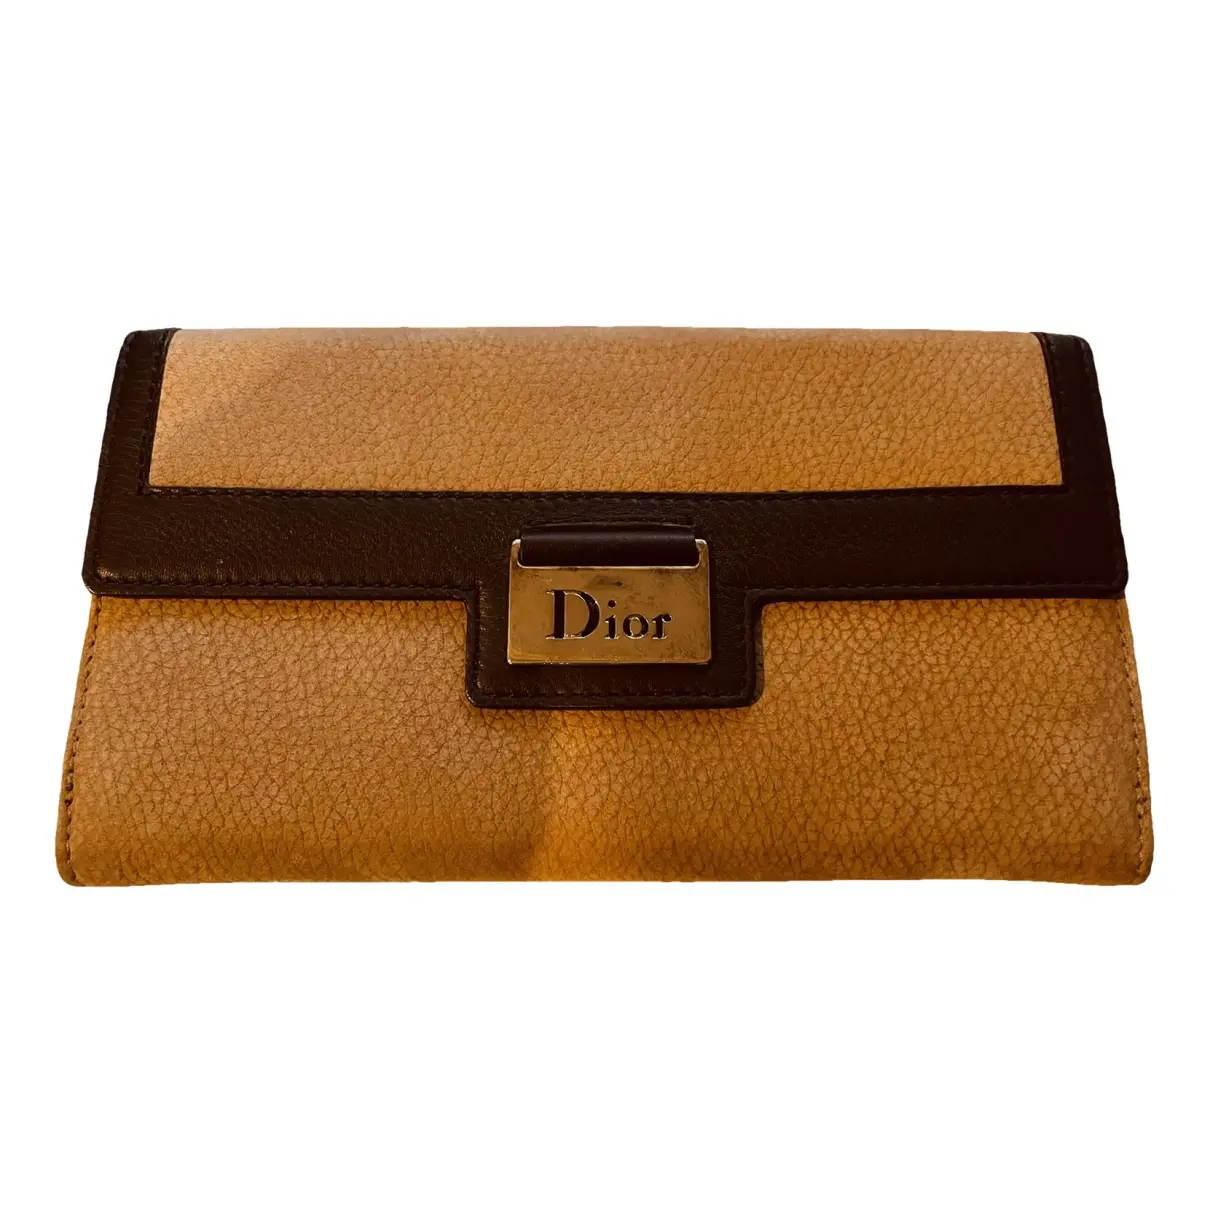 Diorissimo leather wallet